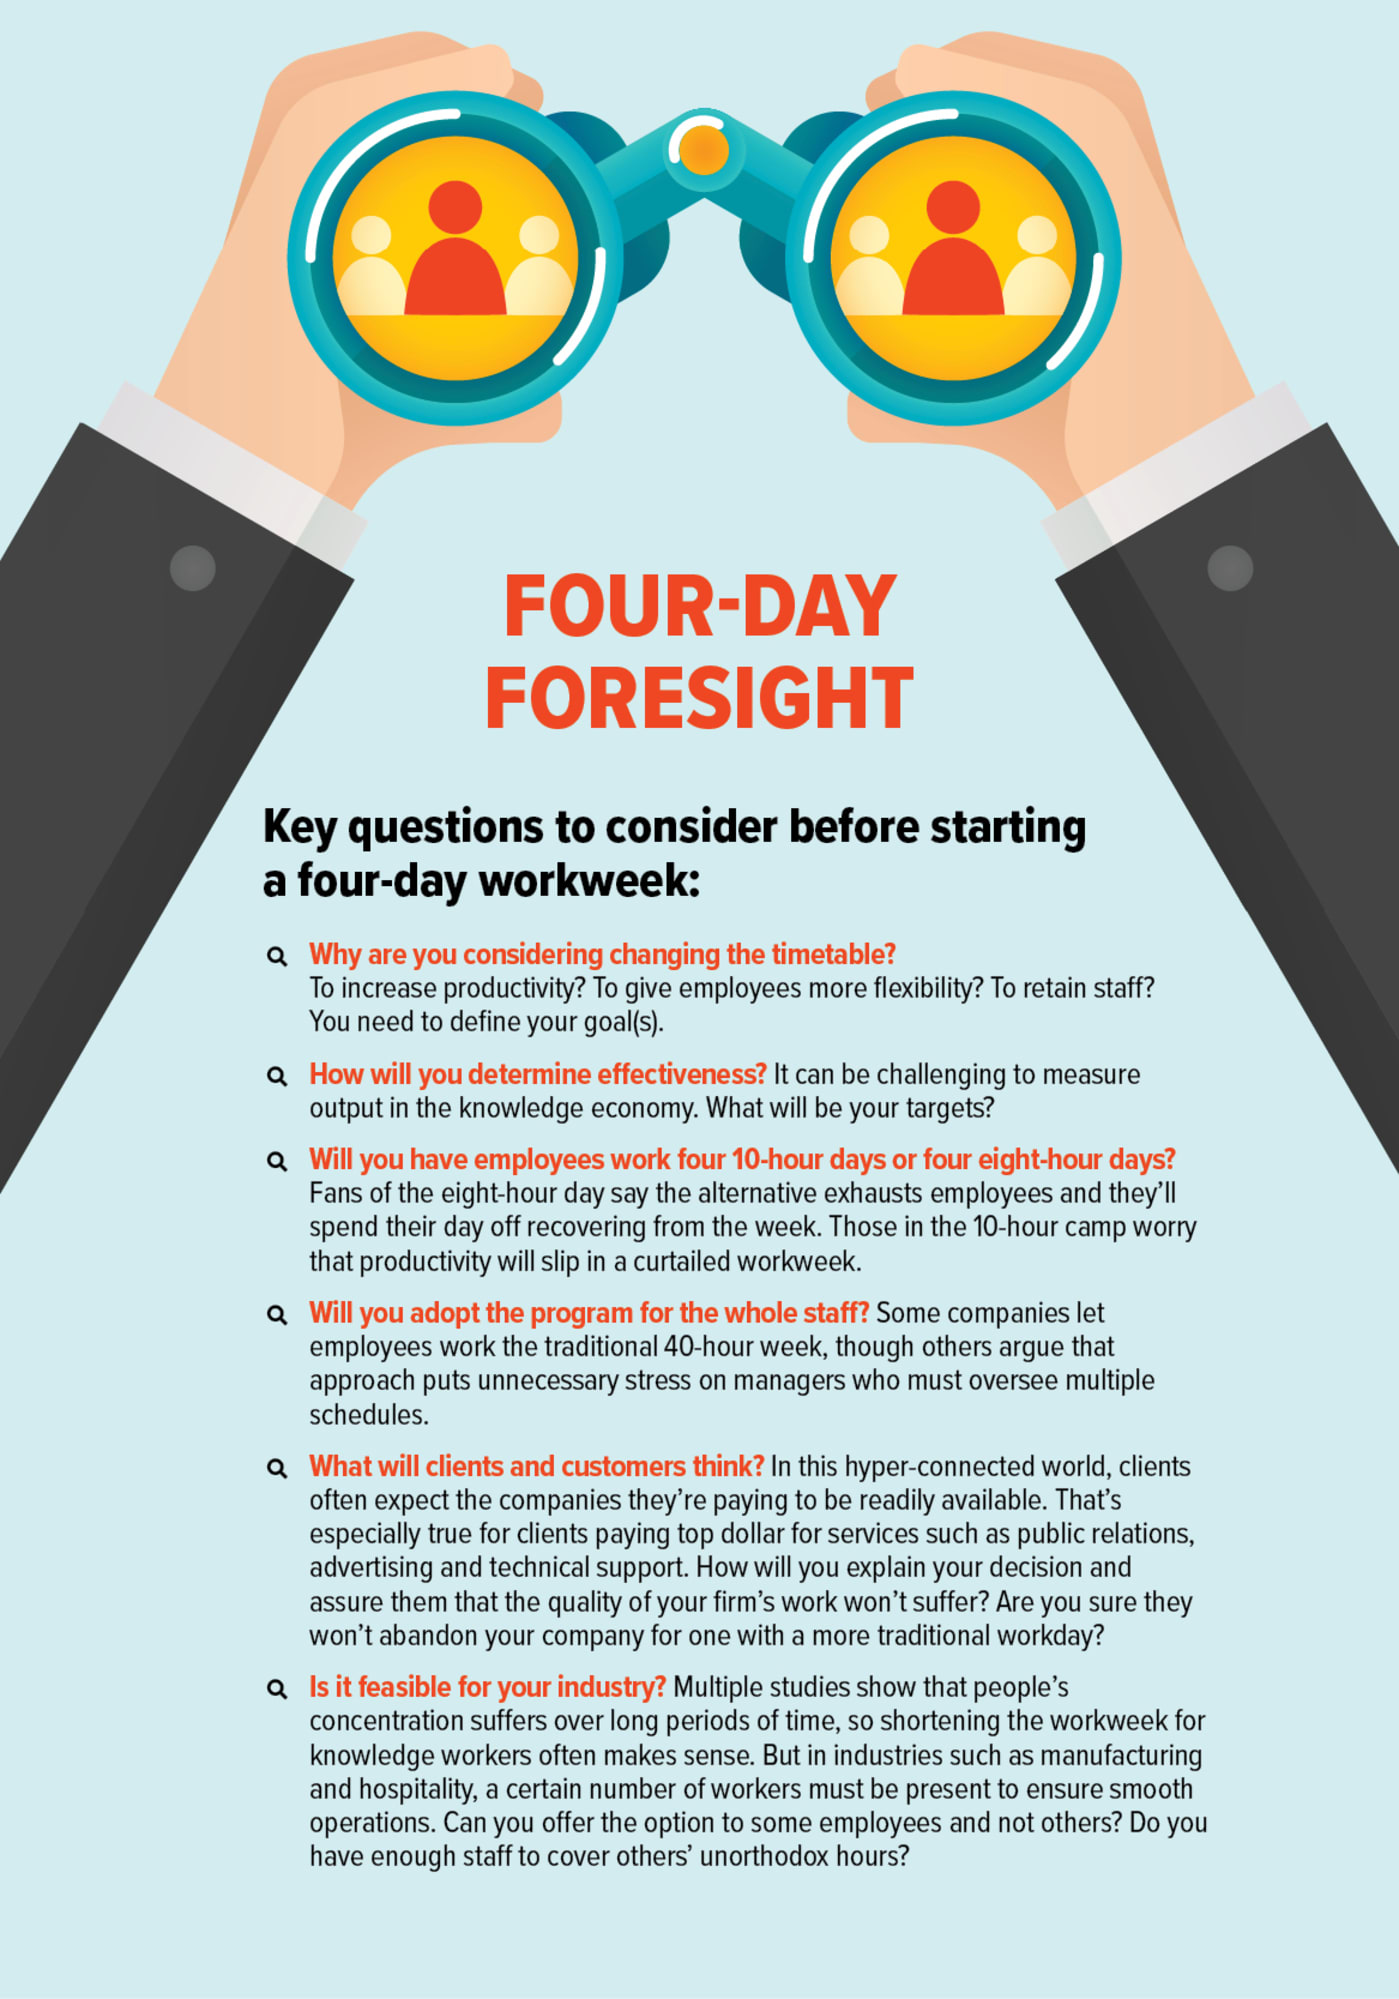 An infographic titled 'Four-Day Foresight' with binoculars highlighting key questions to consider before implementing a four-day workweek, touching on company goals, measuring effectiveness, and the feasibility for different industries.